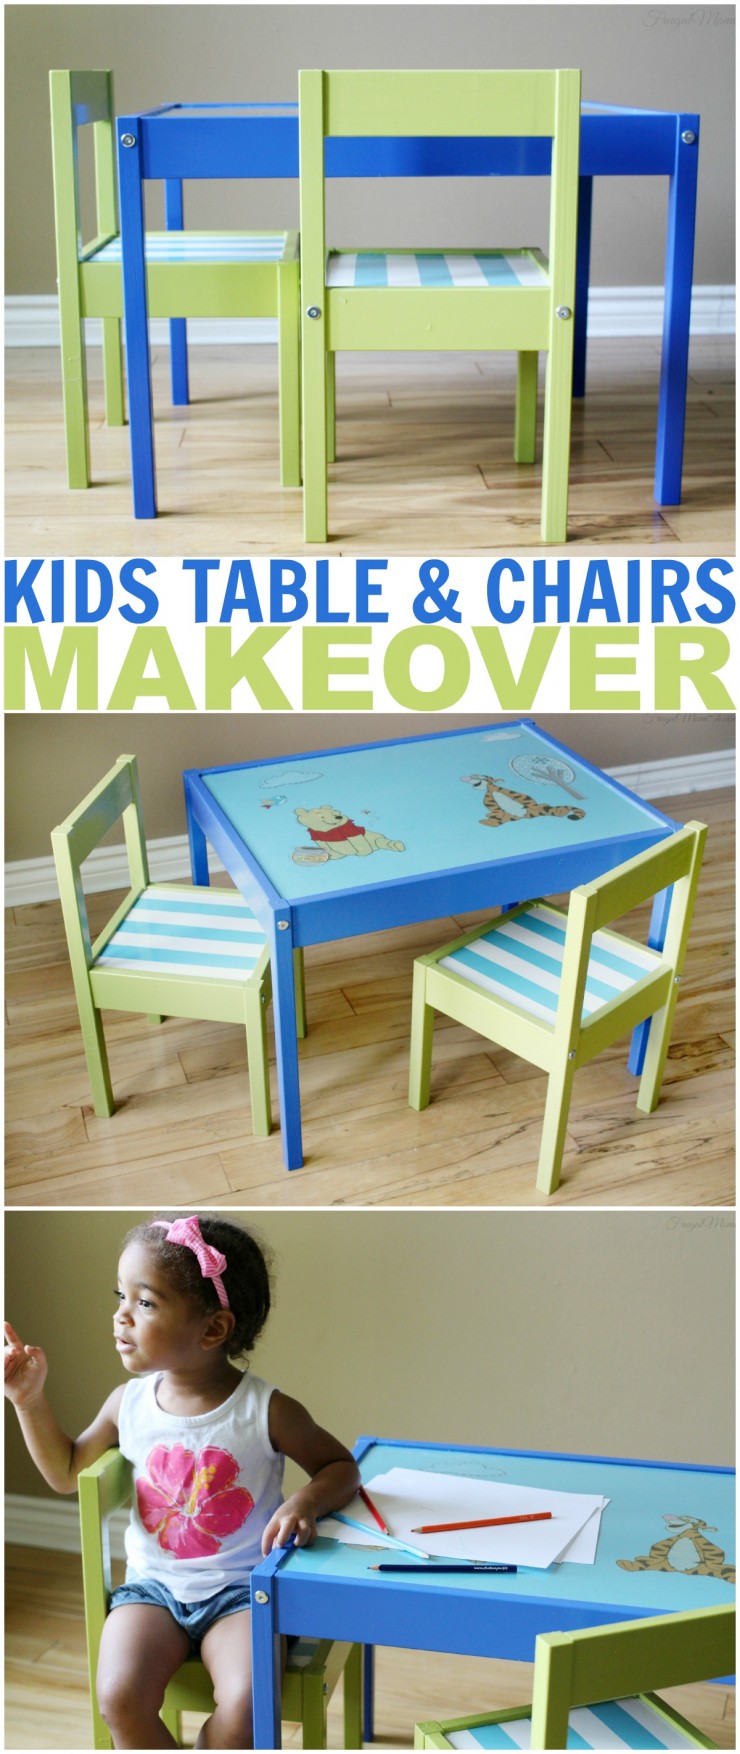 Kids Table and Chairs Makeover - LÄTT Children's table and 2 chairs get an awesome diy custom makeover with BEHR paint.